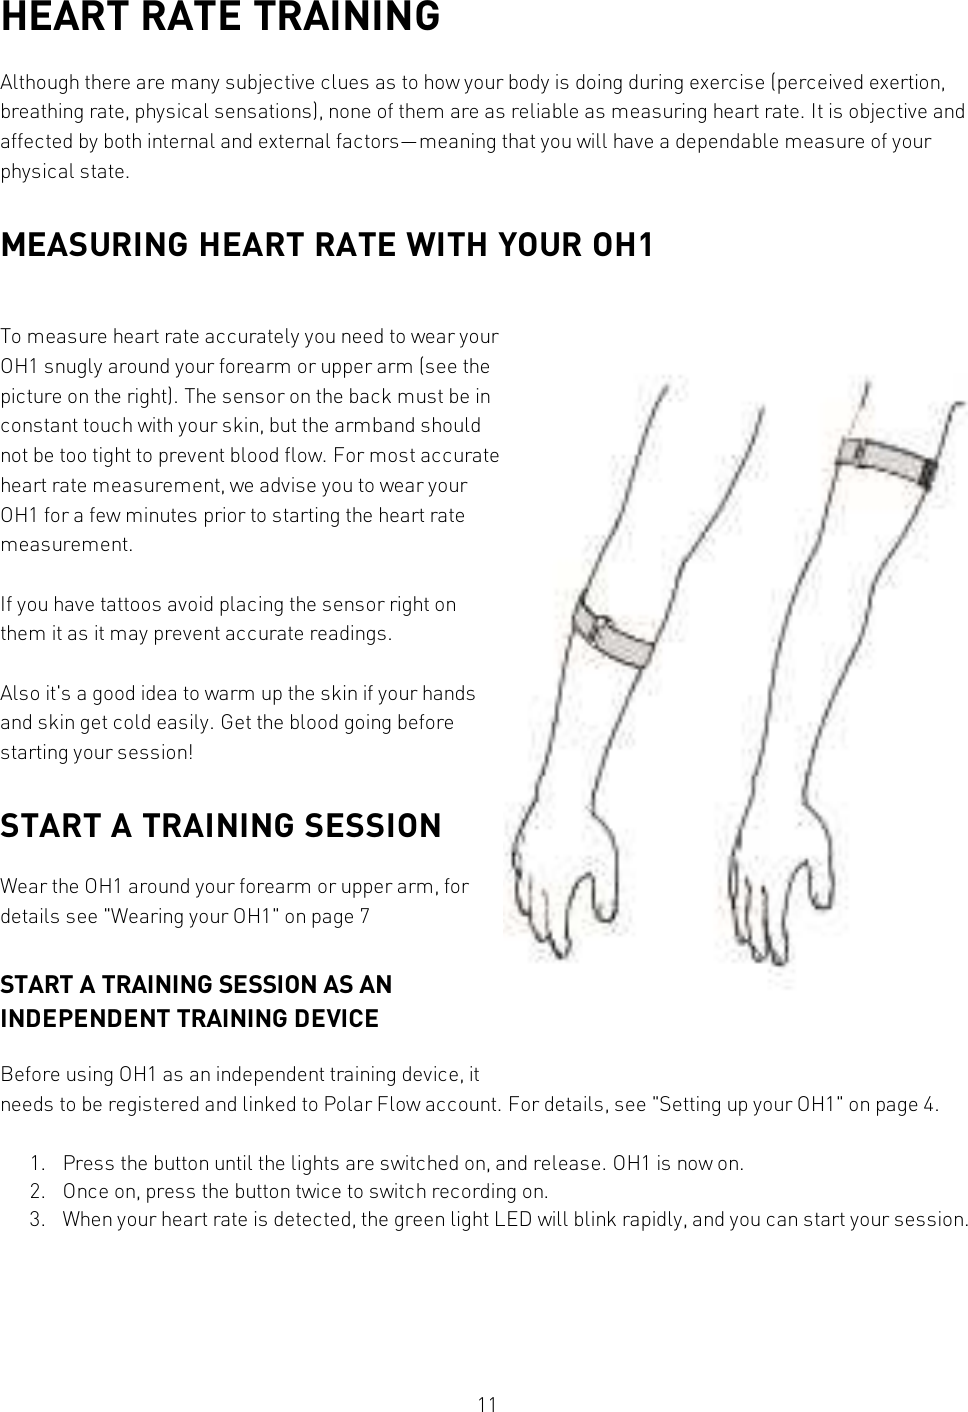 11HEART RATE TRAININGAlthough there are many subjective clues as to how your body is doing during exercise (perceived exertion,breathing rate, physical sensations), none of them are as reliable as measuring heart rate. It is objective andaffected by both internal and external factors—meaning that you will have a dependable measure of yourphysical state.MEASURING HEART RATE WITH YOUR OH1To measure heart rate accurately you need to wear yourOH1 snugly around your forearm or upper arm (see thepicture on the right). The sensor on the back must be inconstant touch with your skin, but the armband shouldnot be too tight to prevent blood flow. For most accurateheart rate measurement, we advise you to wear yourOH1 for a few minutes prior to starting the heart ratemeasurement.If you have tattoos avoid placing the sensor right onthem it as it may prevent accurate readings.Also it&apos;s a good idea to warm up the skin if your handsand skin get cold easily. Get the blood going beforestarting your session!START A TRAINING SESSIONWear the OH1 around your forearm or upper arm, fordetails see &quot;Wearing your OH1&quot; on page7START A TRAINING SESSION AS ANINDEPENDENT TRAINING DEVICEBefore using OH1 as an independent training device, itneeds to be registered and linked to Polar Flow account. For details, see &quot;Setting up your OH1&quot; on page4.1. Press the button until the lights are switched on, and release. OH1 is now on.2. Once on, press the button twice to switch recording on.3. When your heart rate is detected, the green light LED will blink rapidly, and you can start your session.